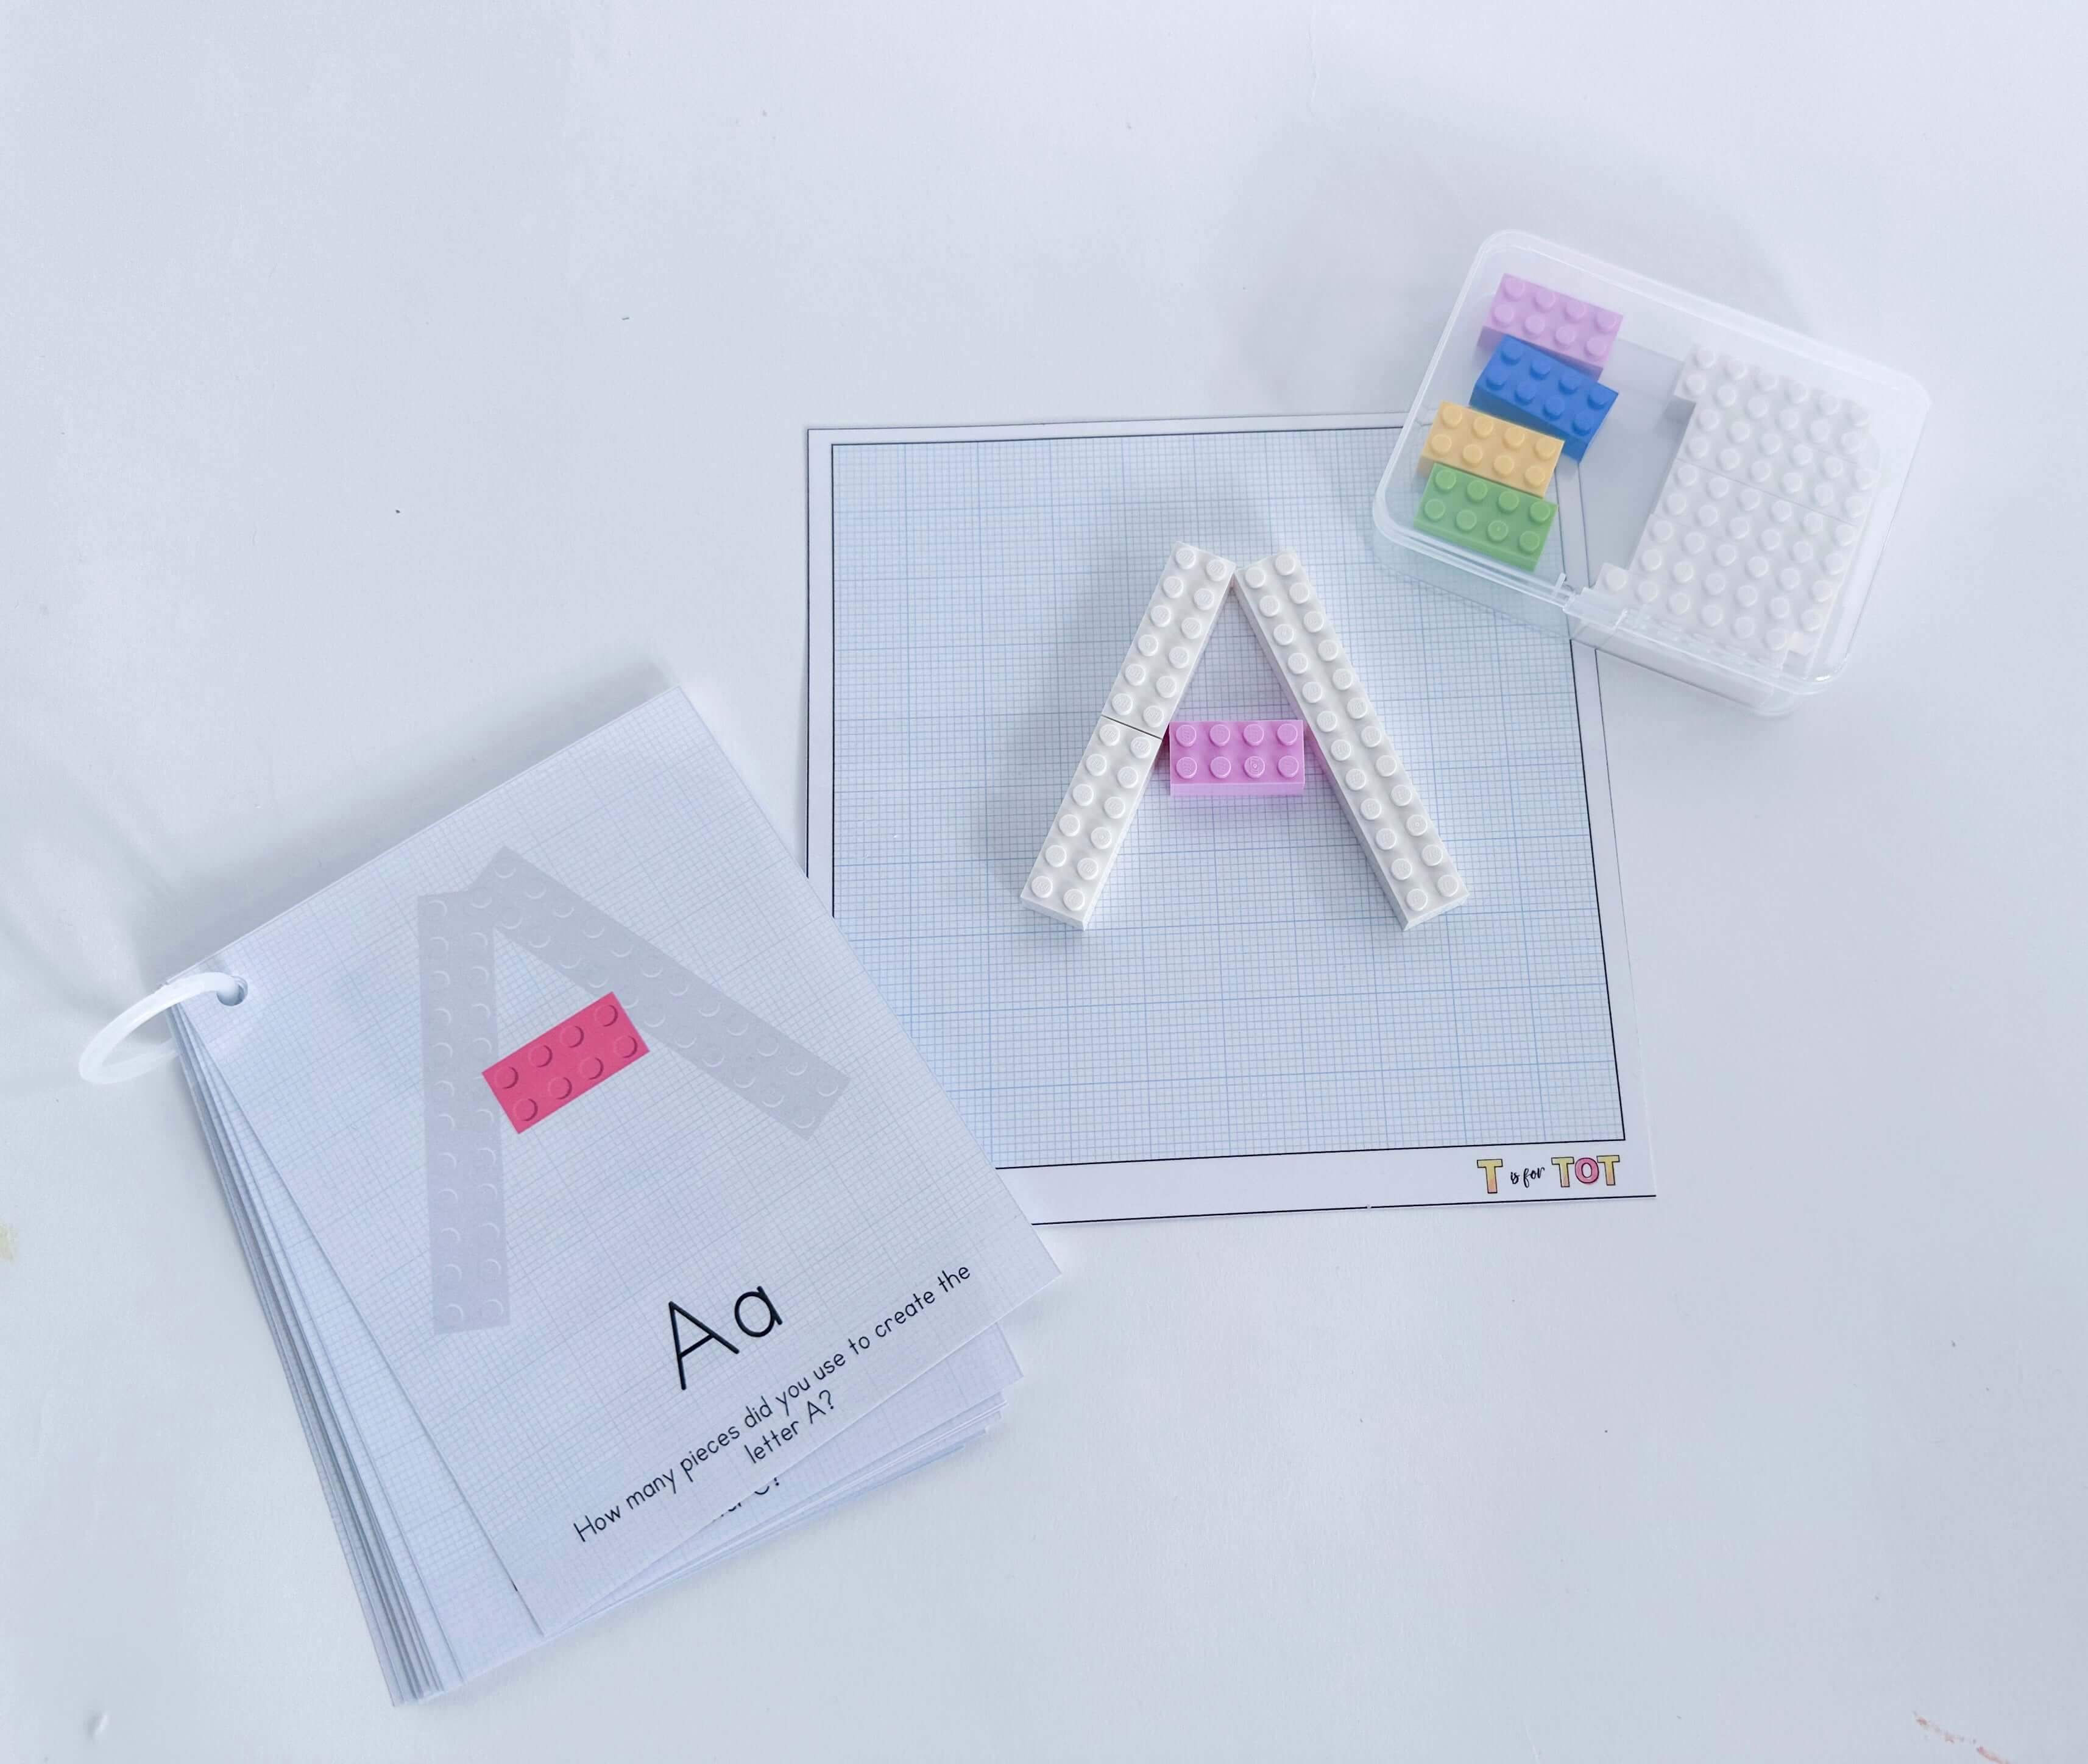 Lego educational learning cards for early childhood education.